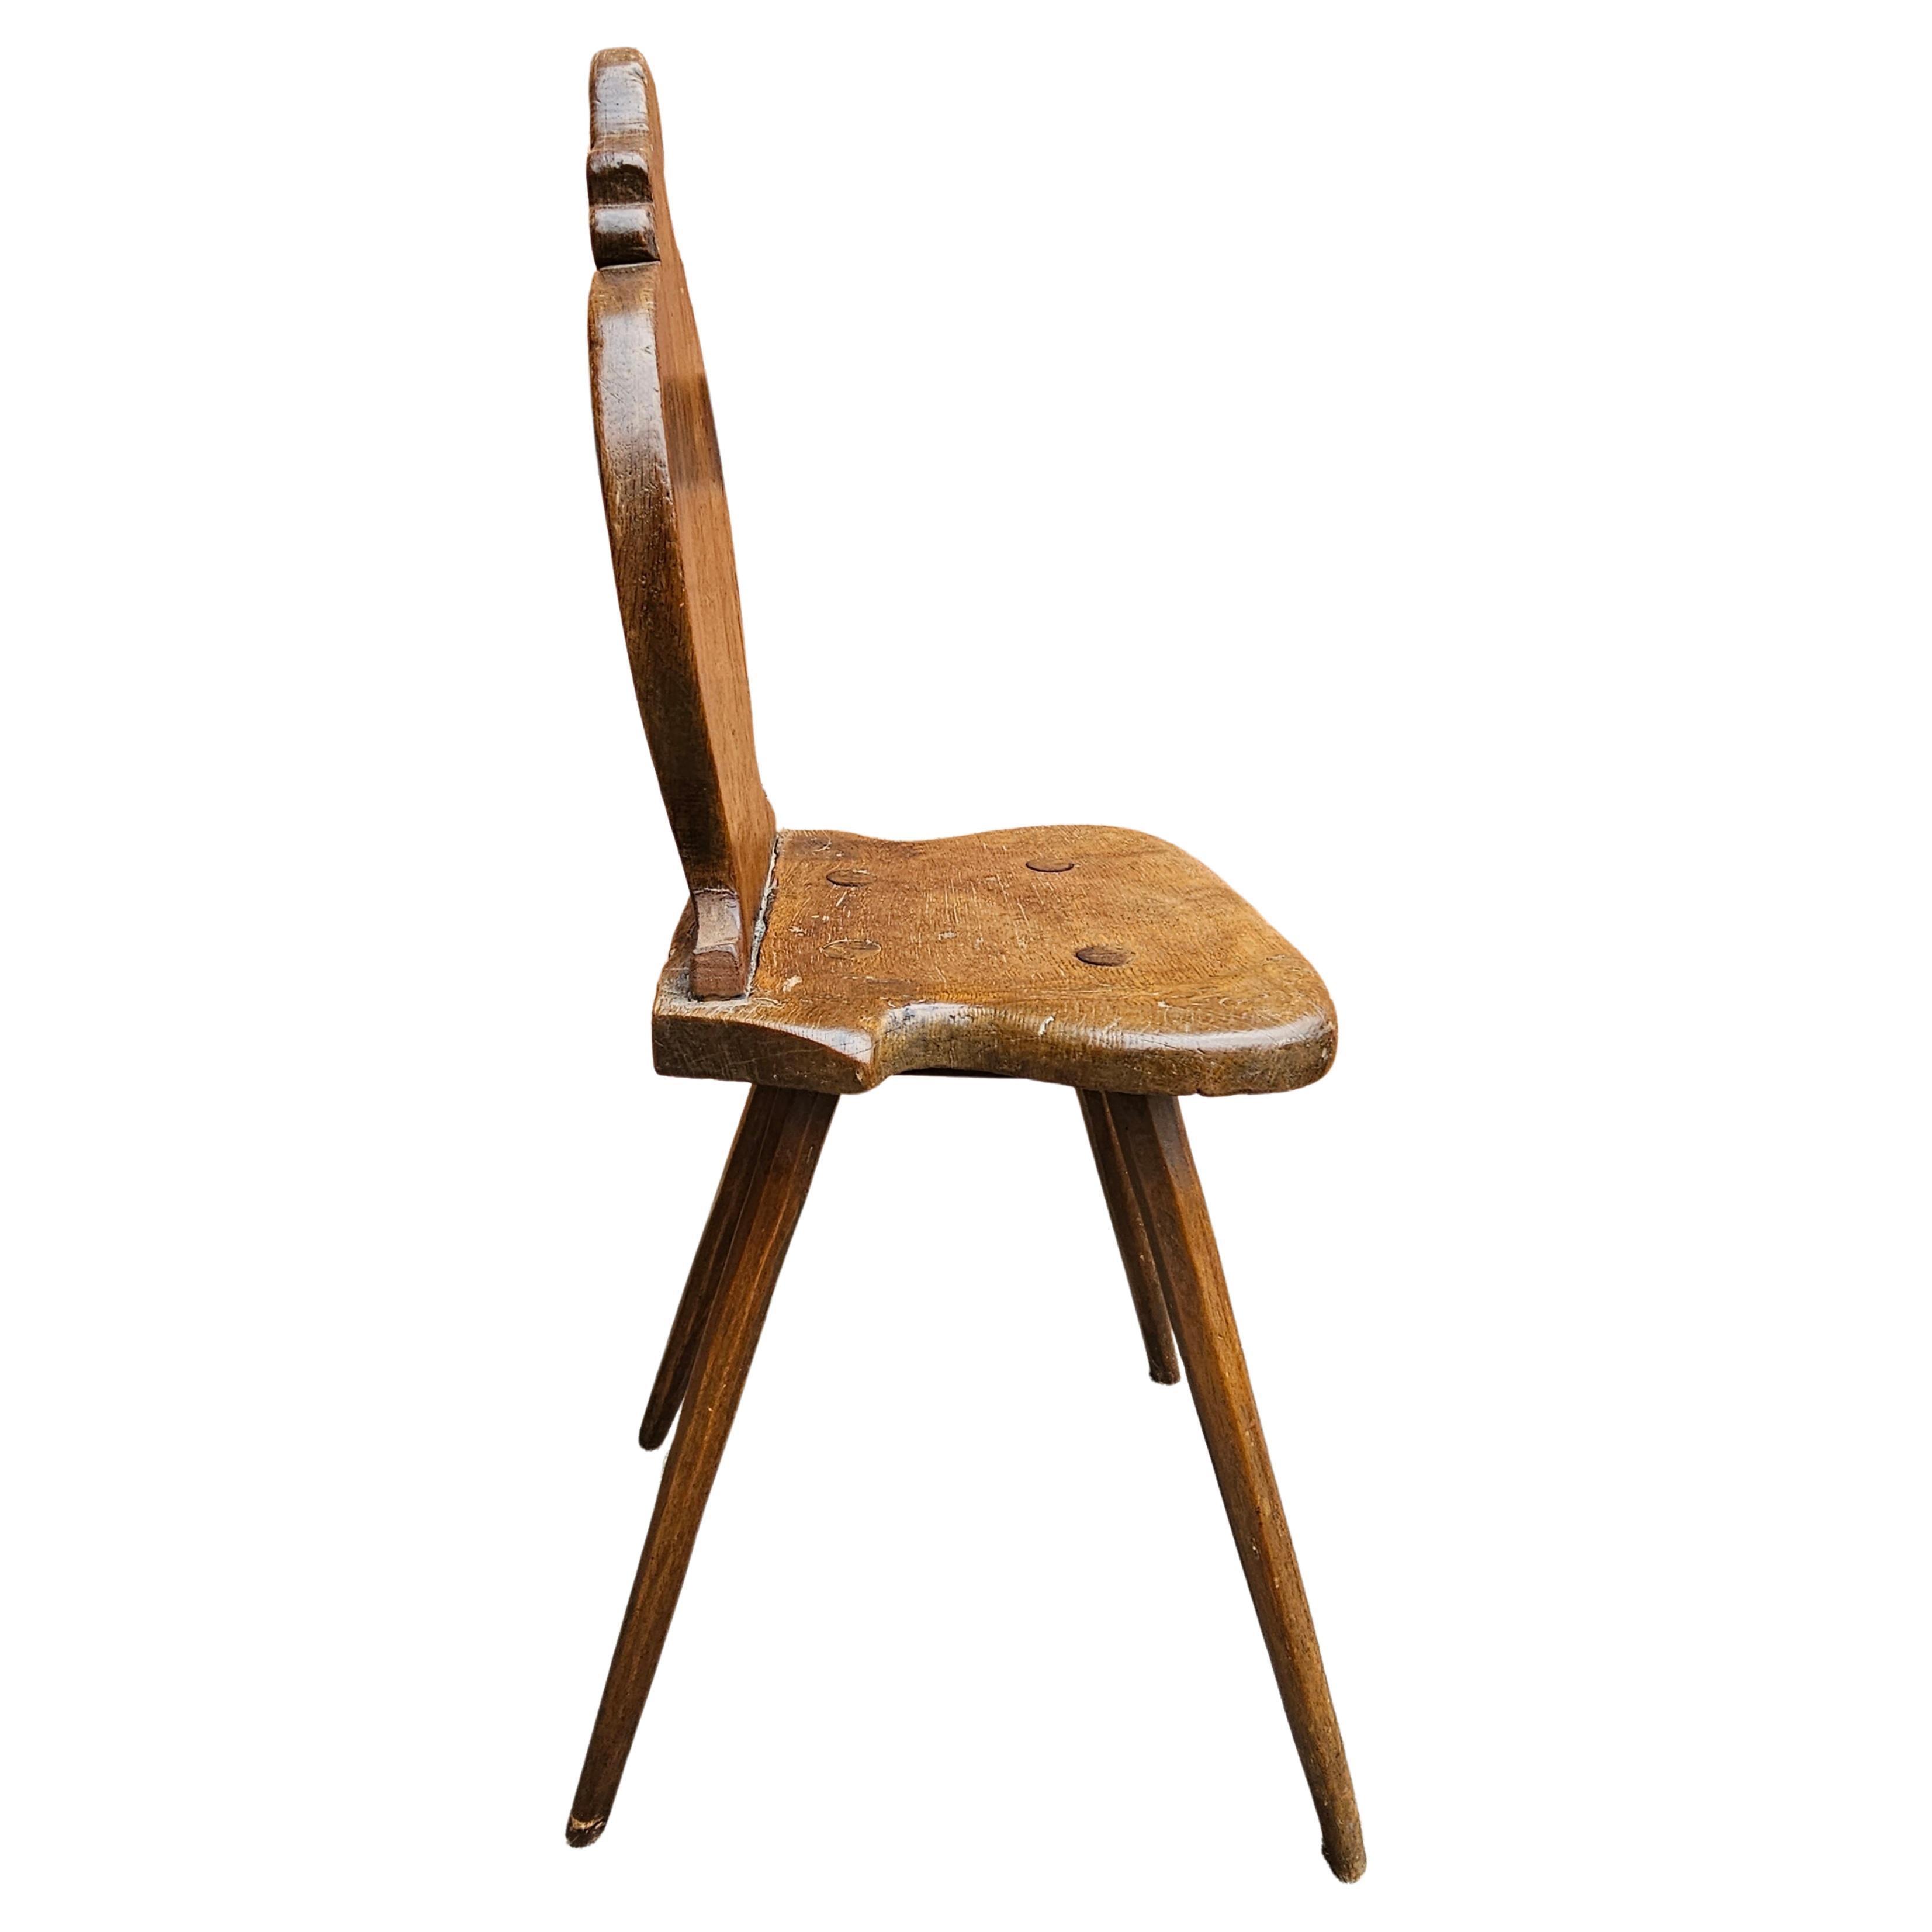 Hand-Crafted 19th Century Elm Swiss Alp Escabelle Chair For Sale